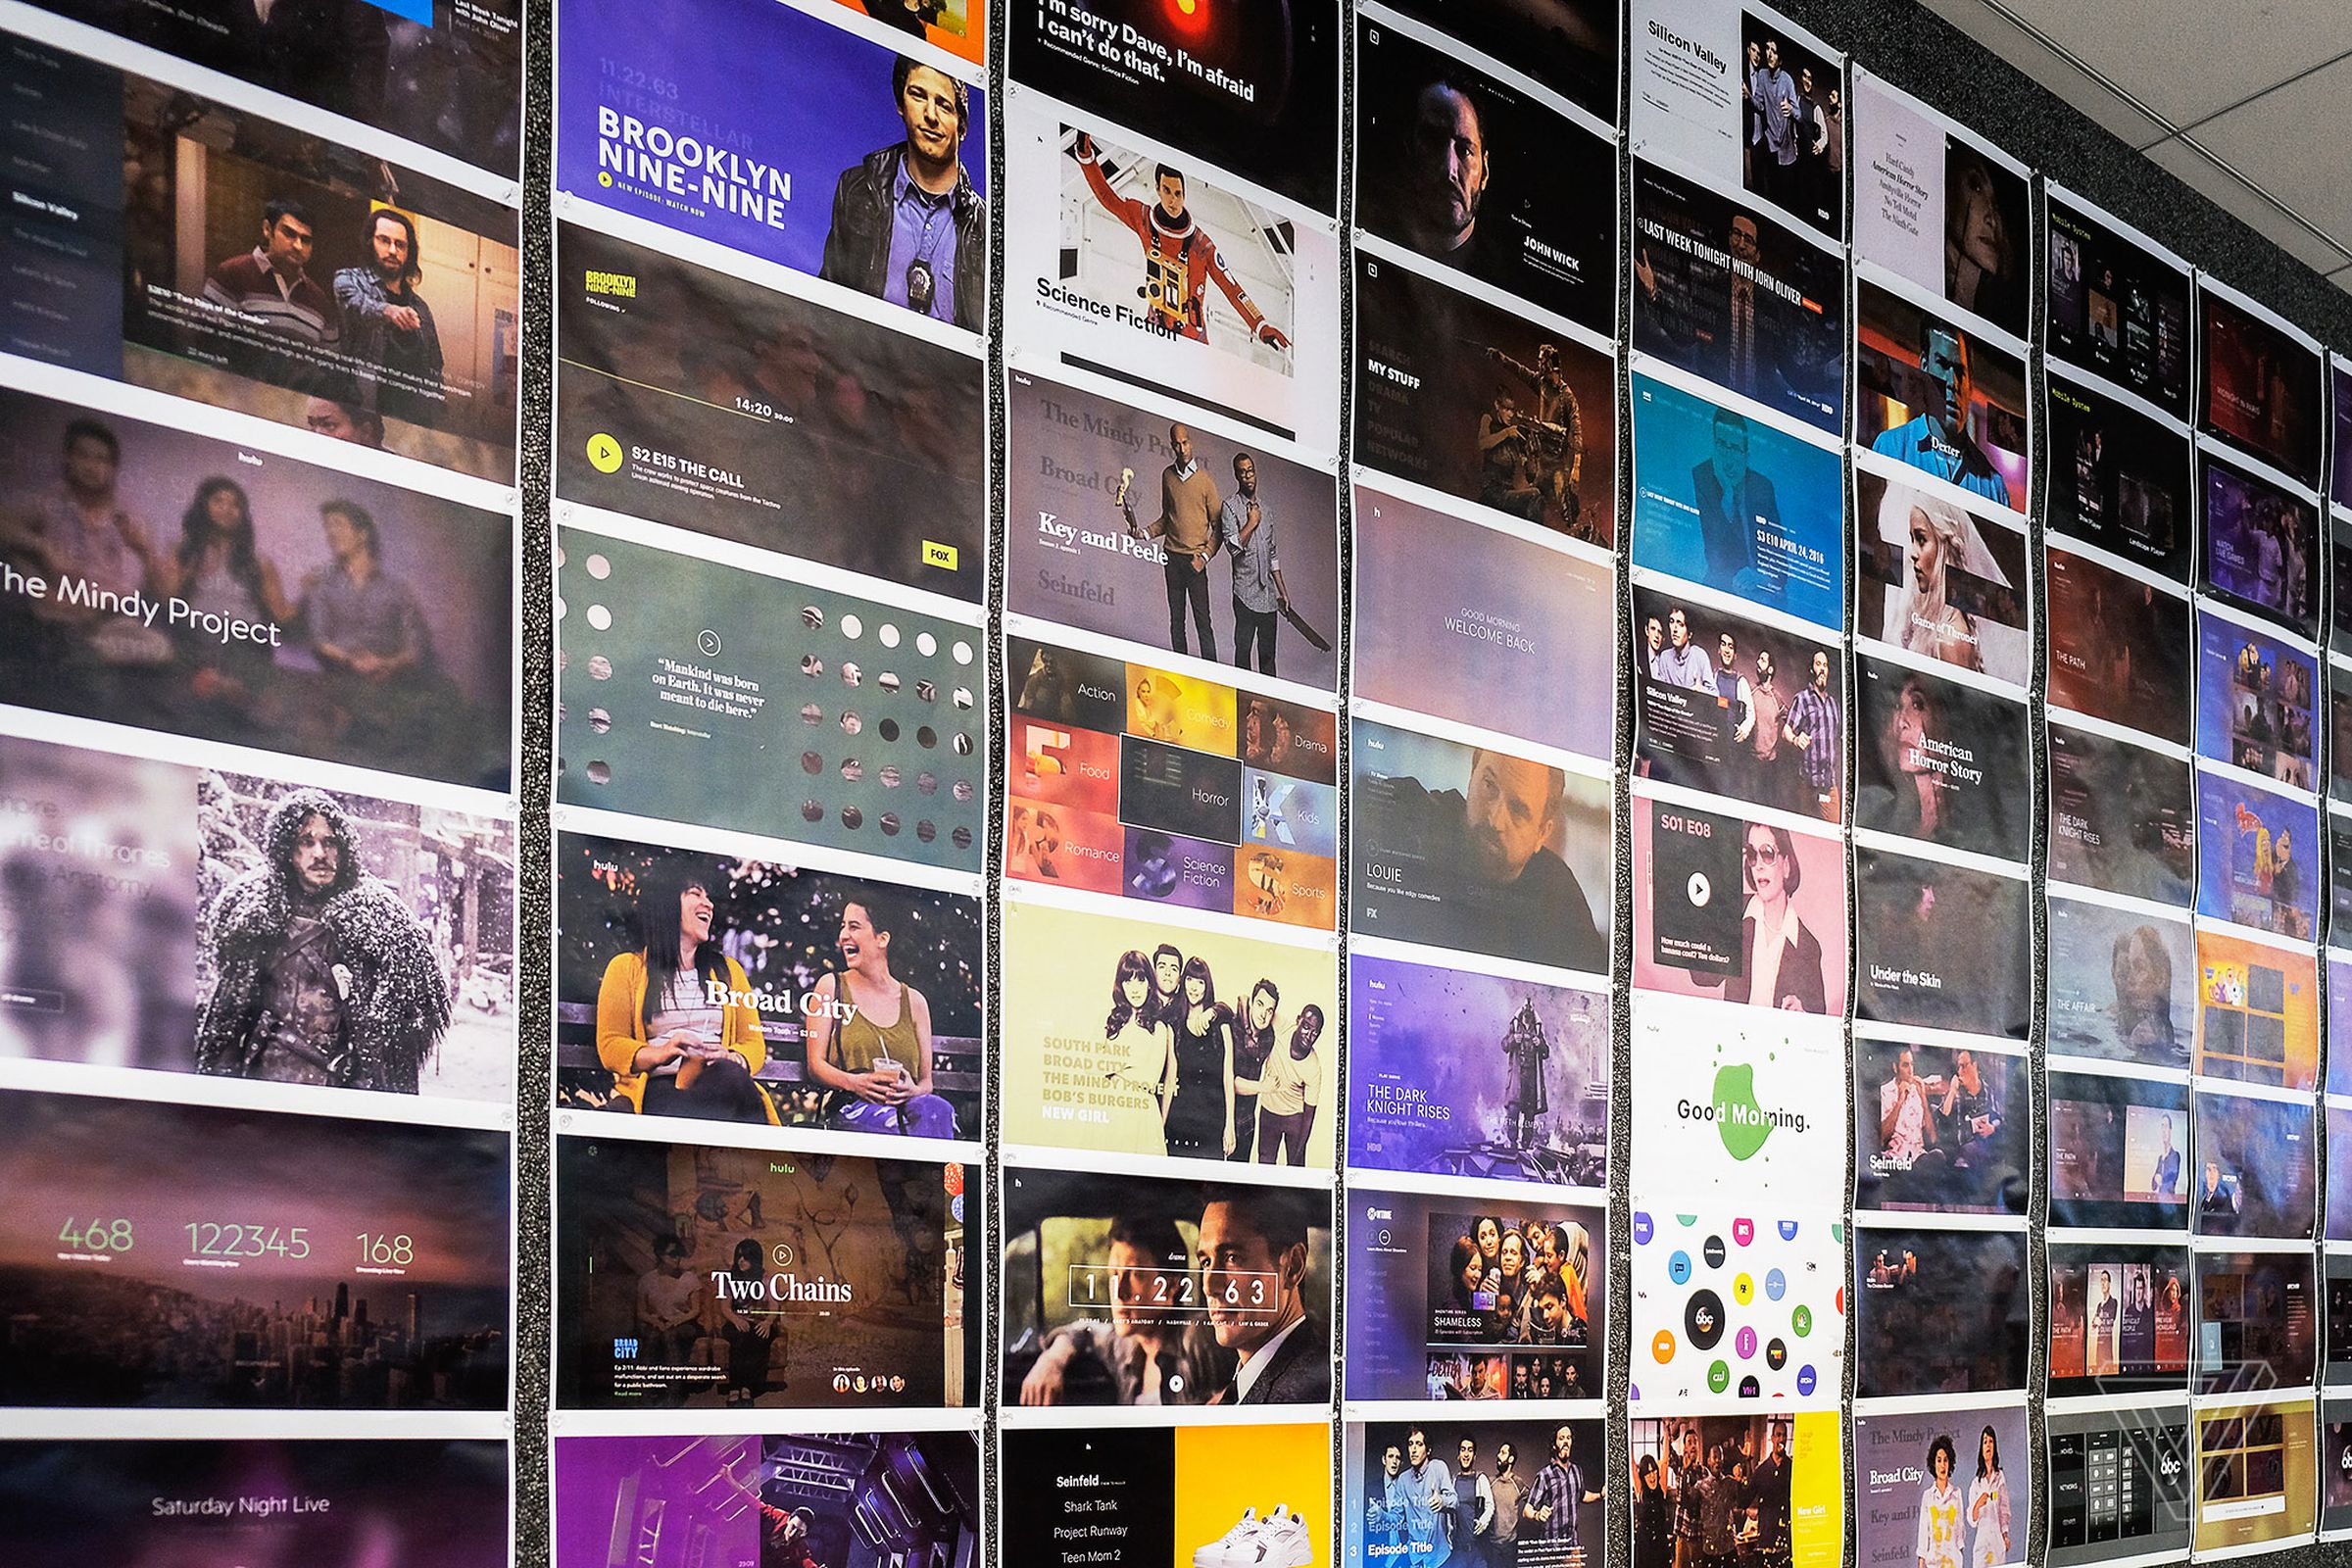 User interface mockups for Hulu’s TV service line the walls at the company’s headquarters. 